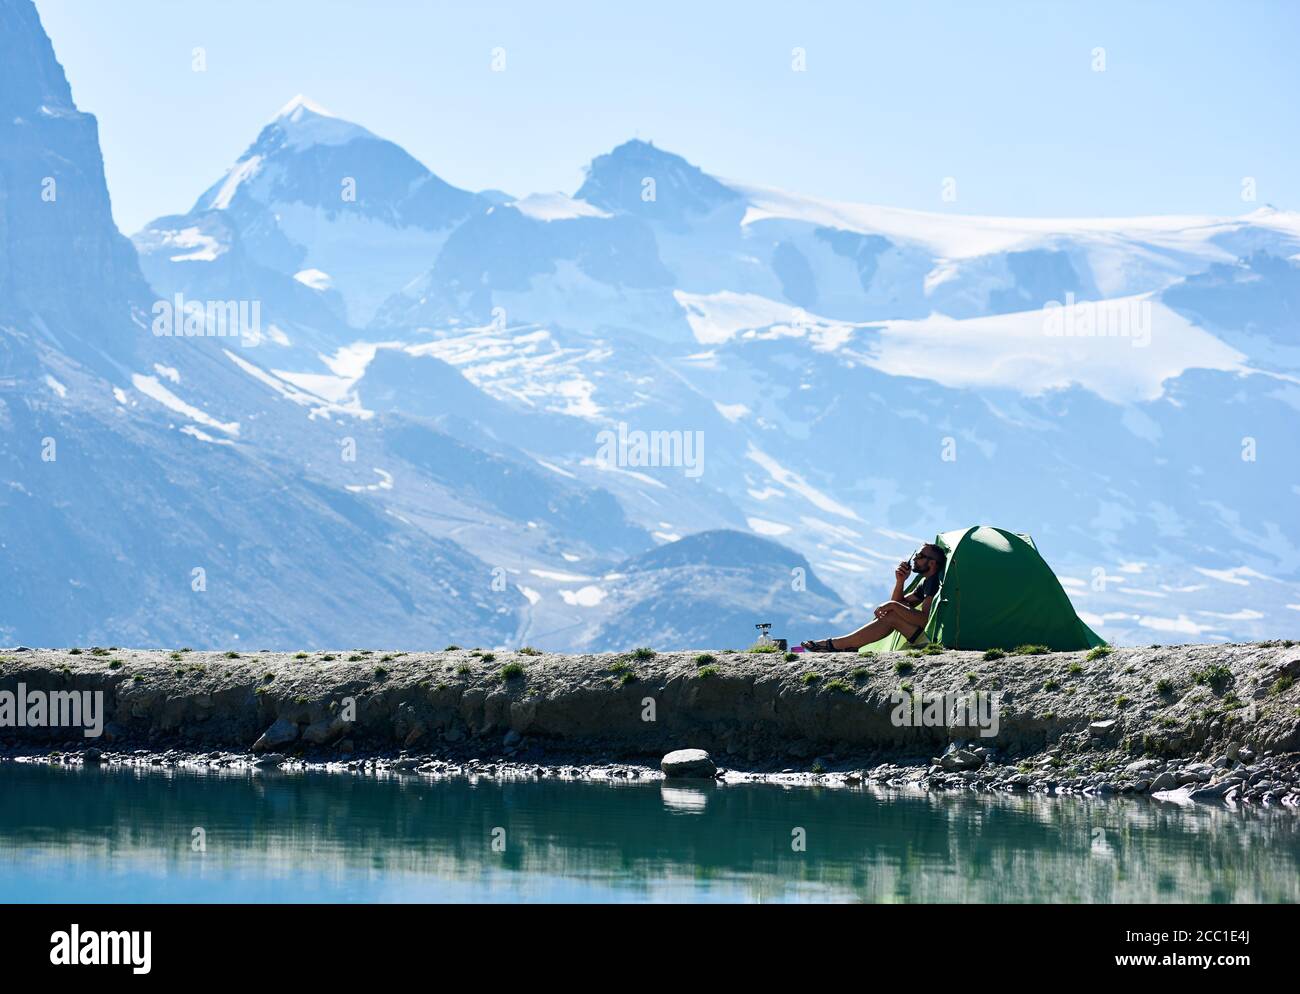 Man enjoying scenery, sitting inside tent in rocky alpine mountains near lake with fresh clear water. Alpinist using radio, talking with friends alpinists in the mountains. Concept of nature beauty. Stock Photo